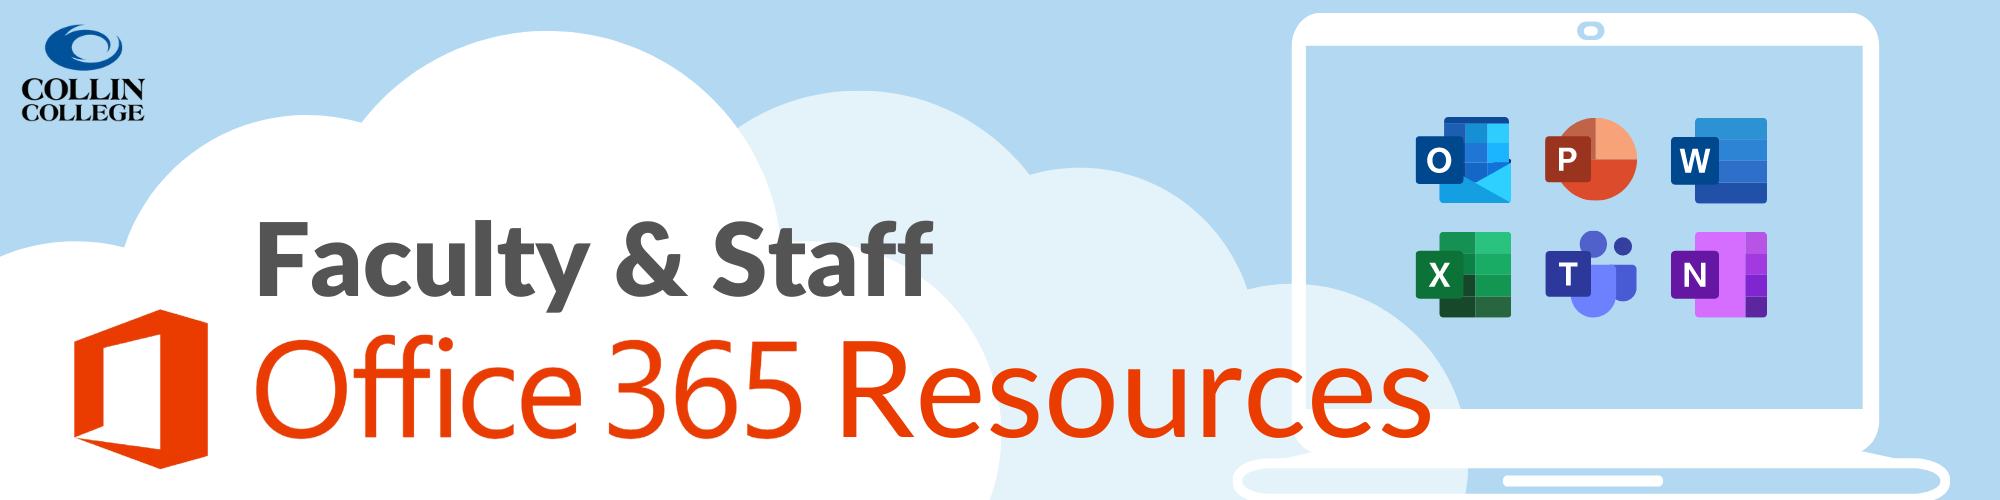 Office 365 Faculty and Staff Resources